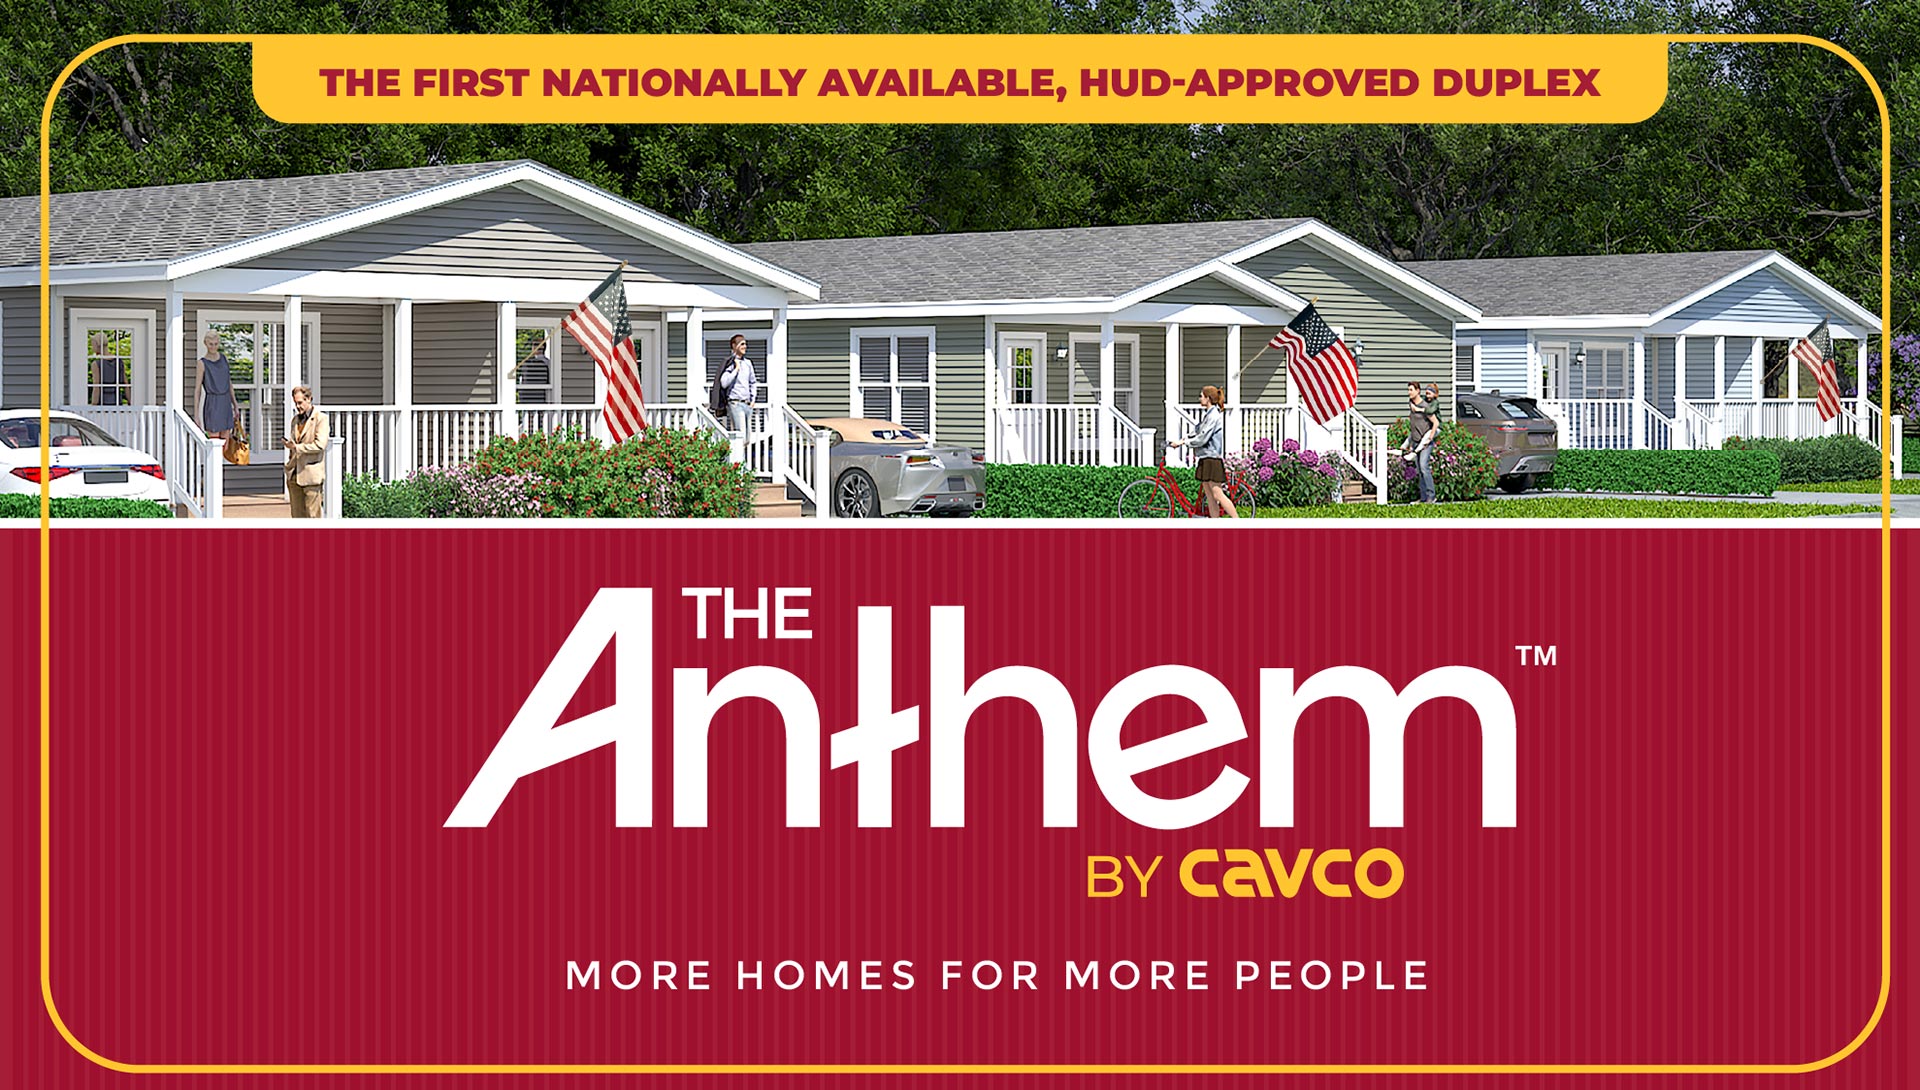 The Anthem by Cavco | More Homes for More People | The First Nationally Available, HUD-approved Duplex